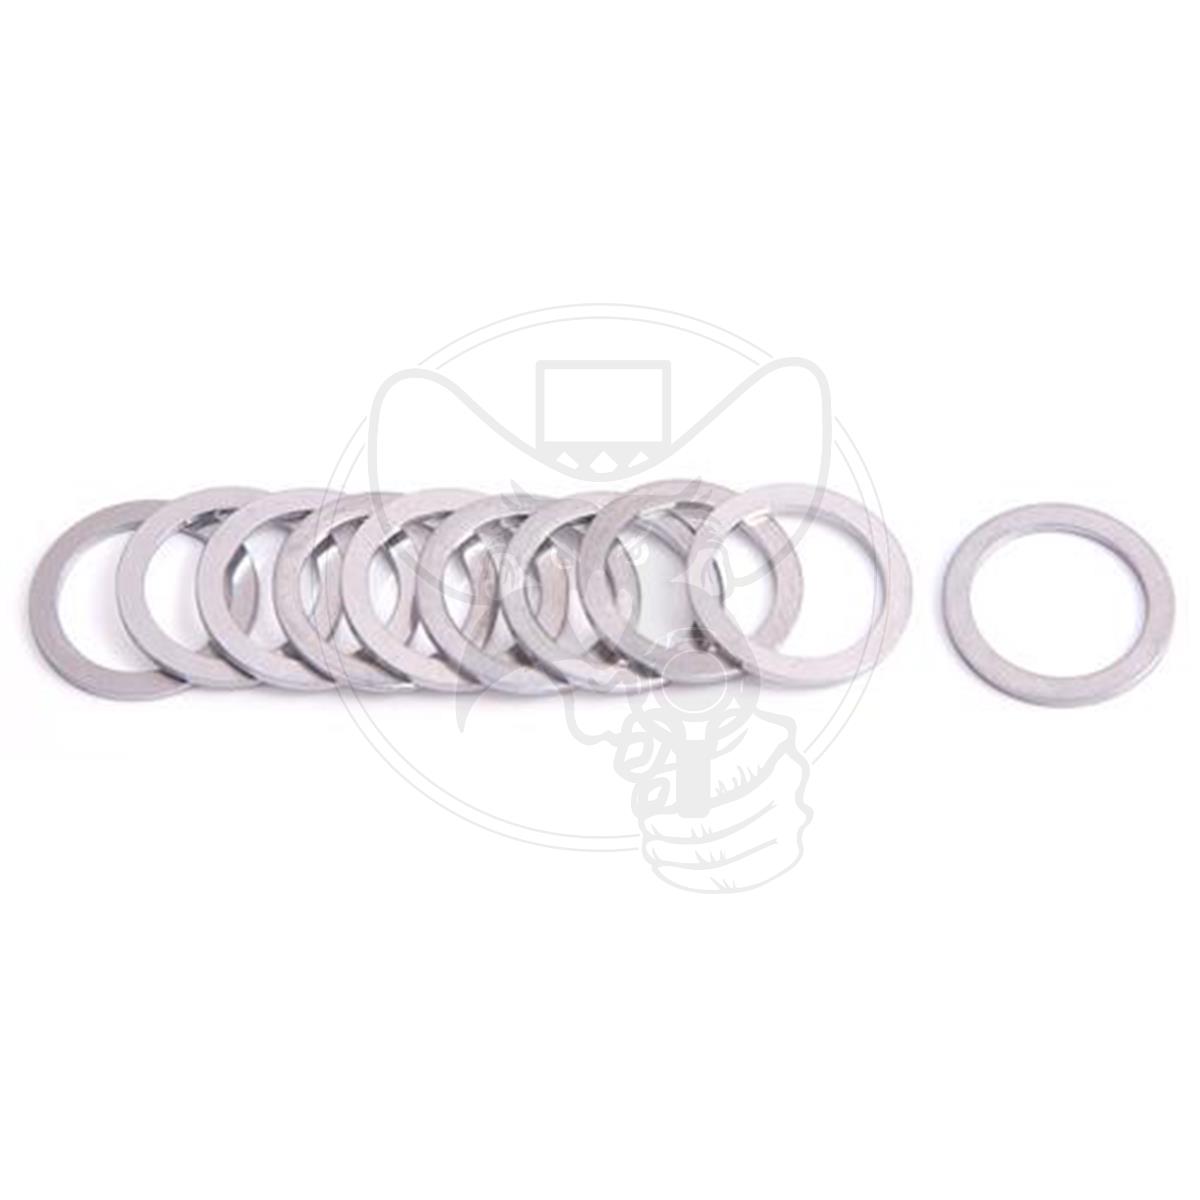 AEROFLOW ALUM WASHERS -8AN 19.3mm ID .95mm Thick 10-PACK